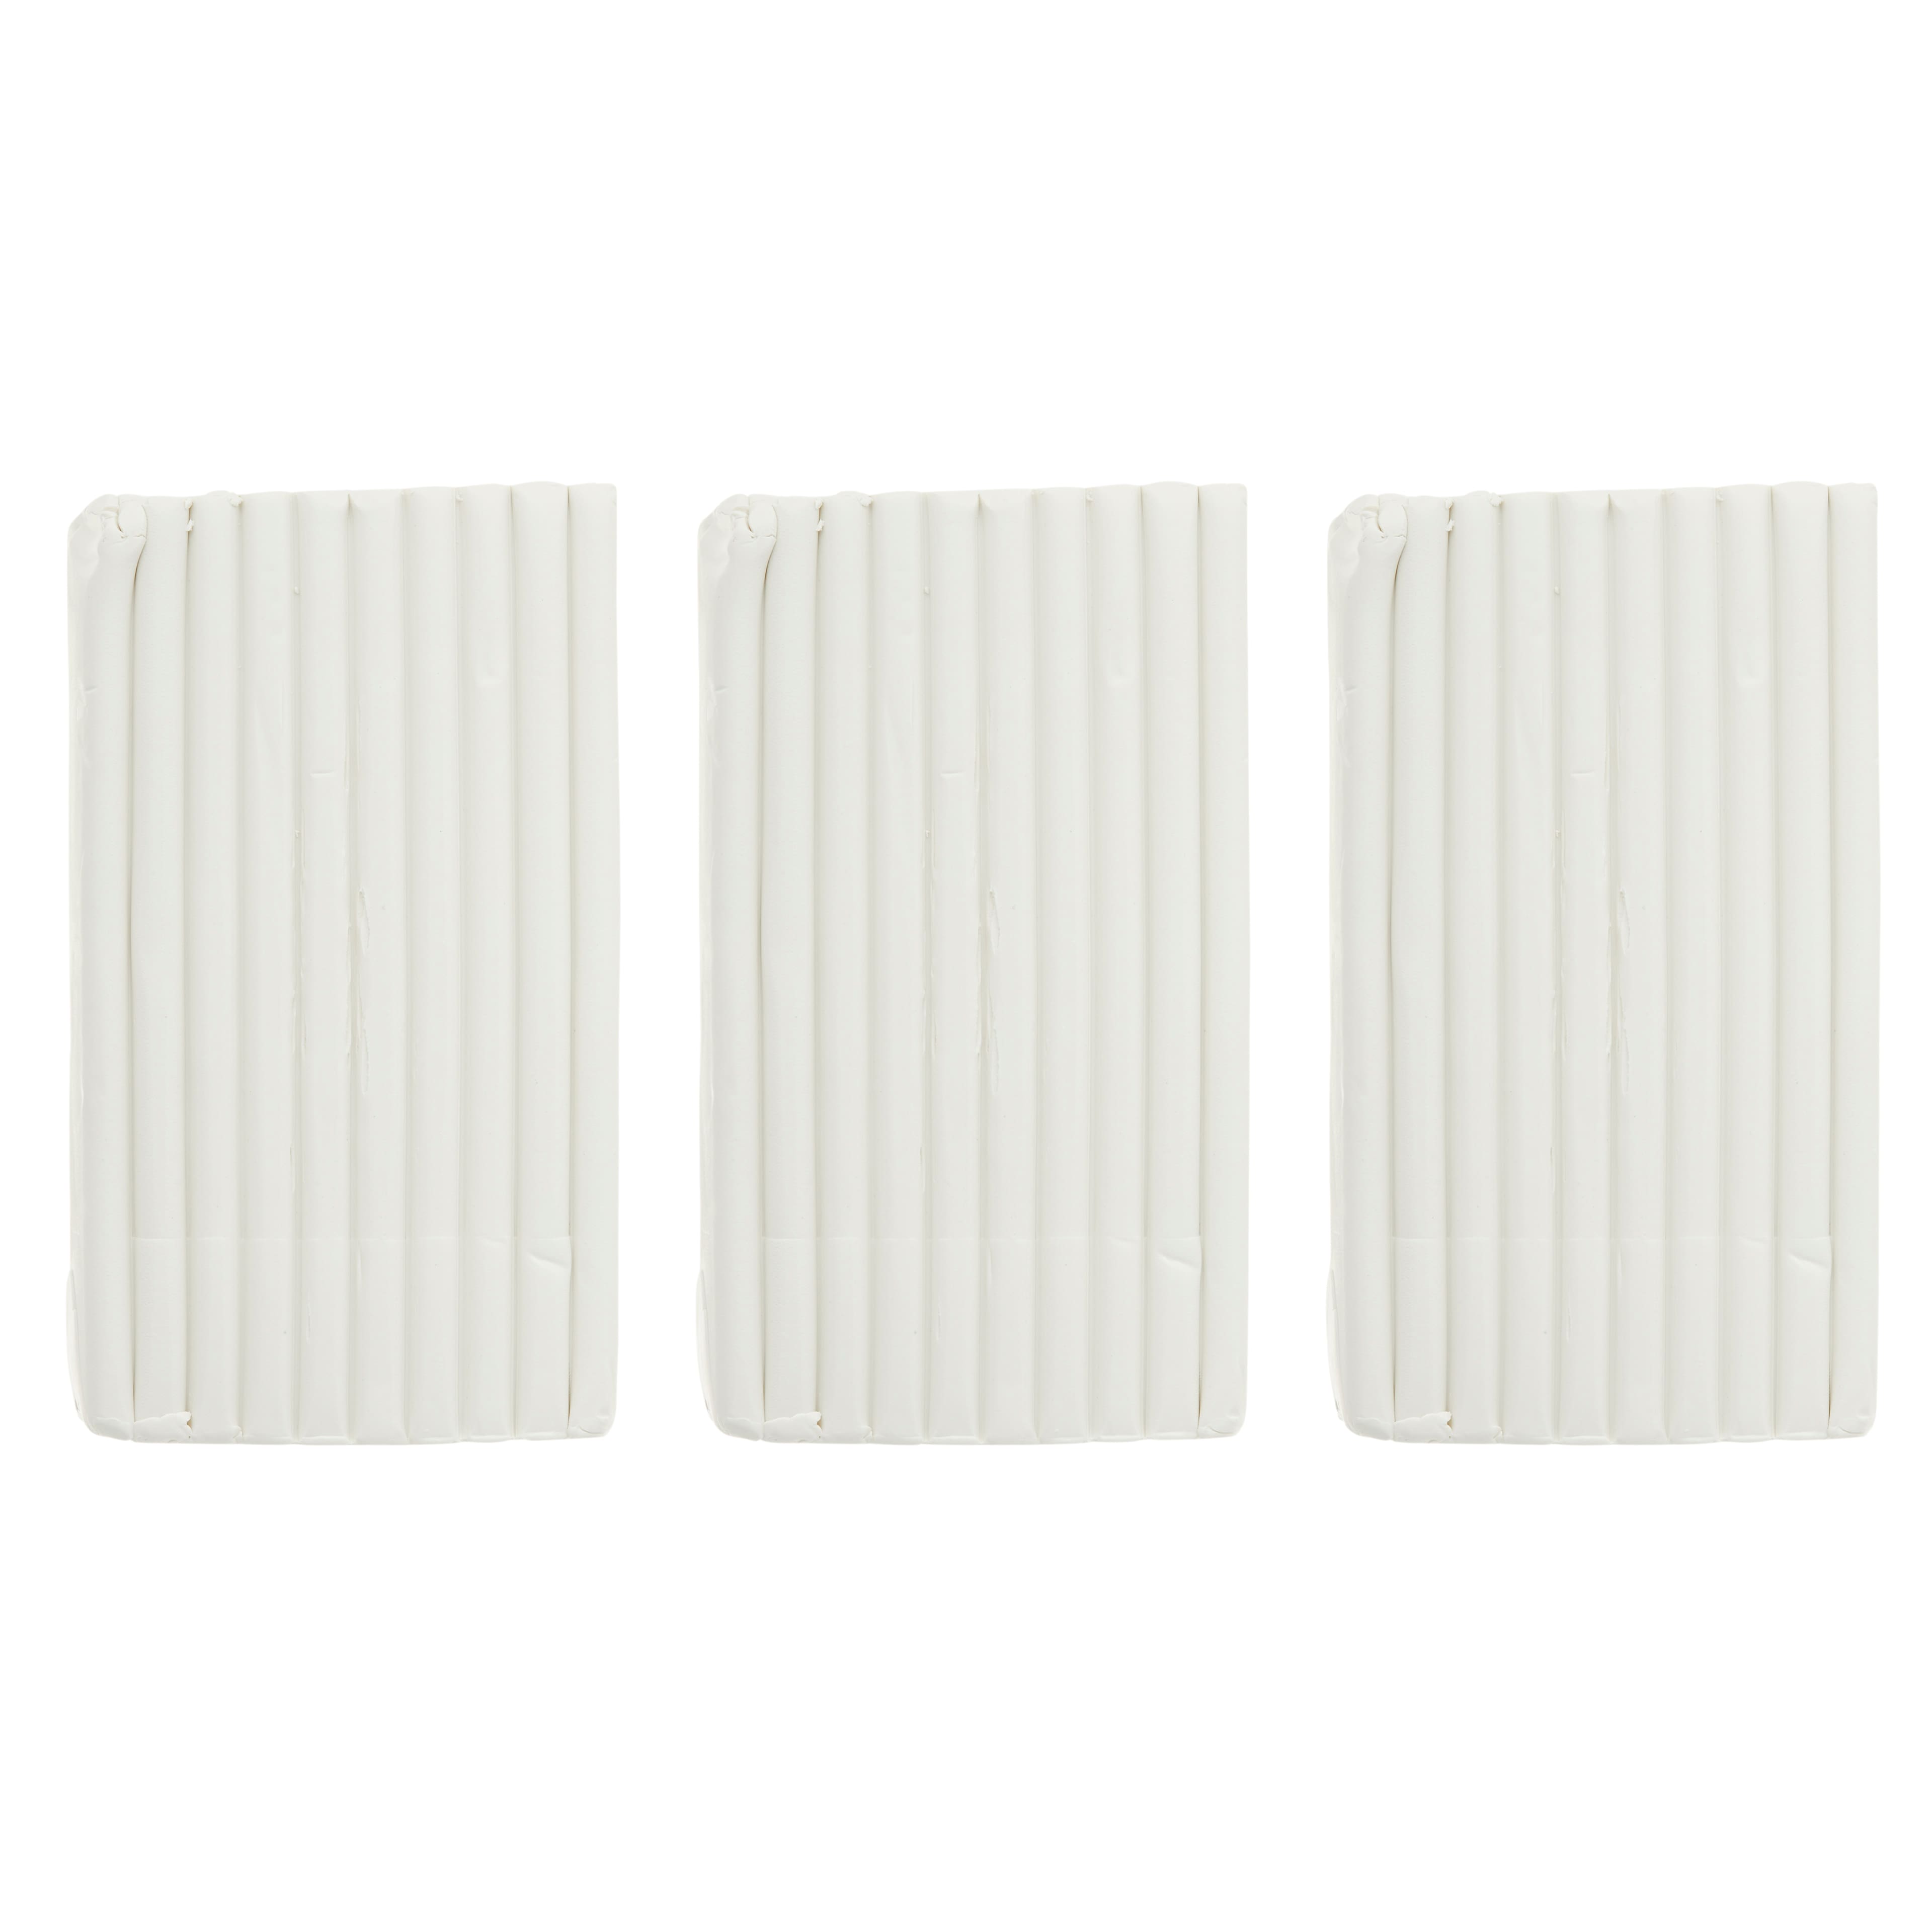 6 Pack: 3lb. White Oven-Bake Polymer Clay by Craft Smart®